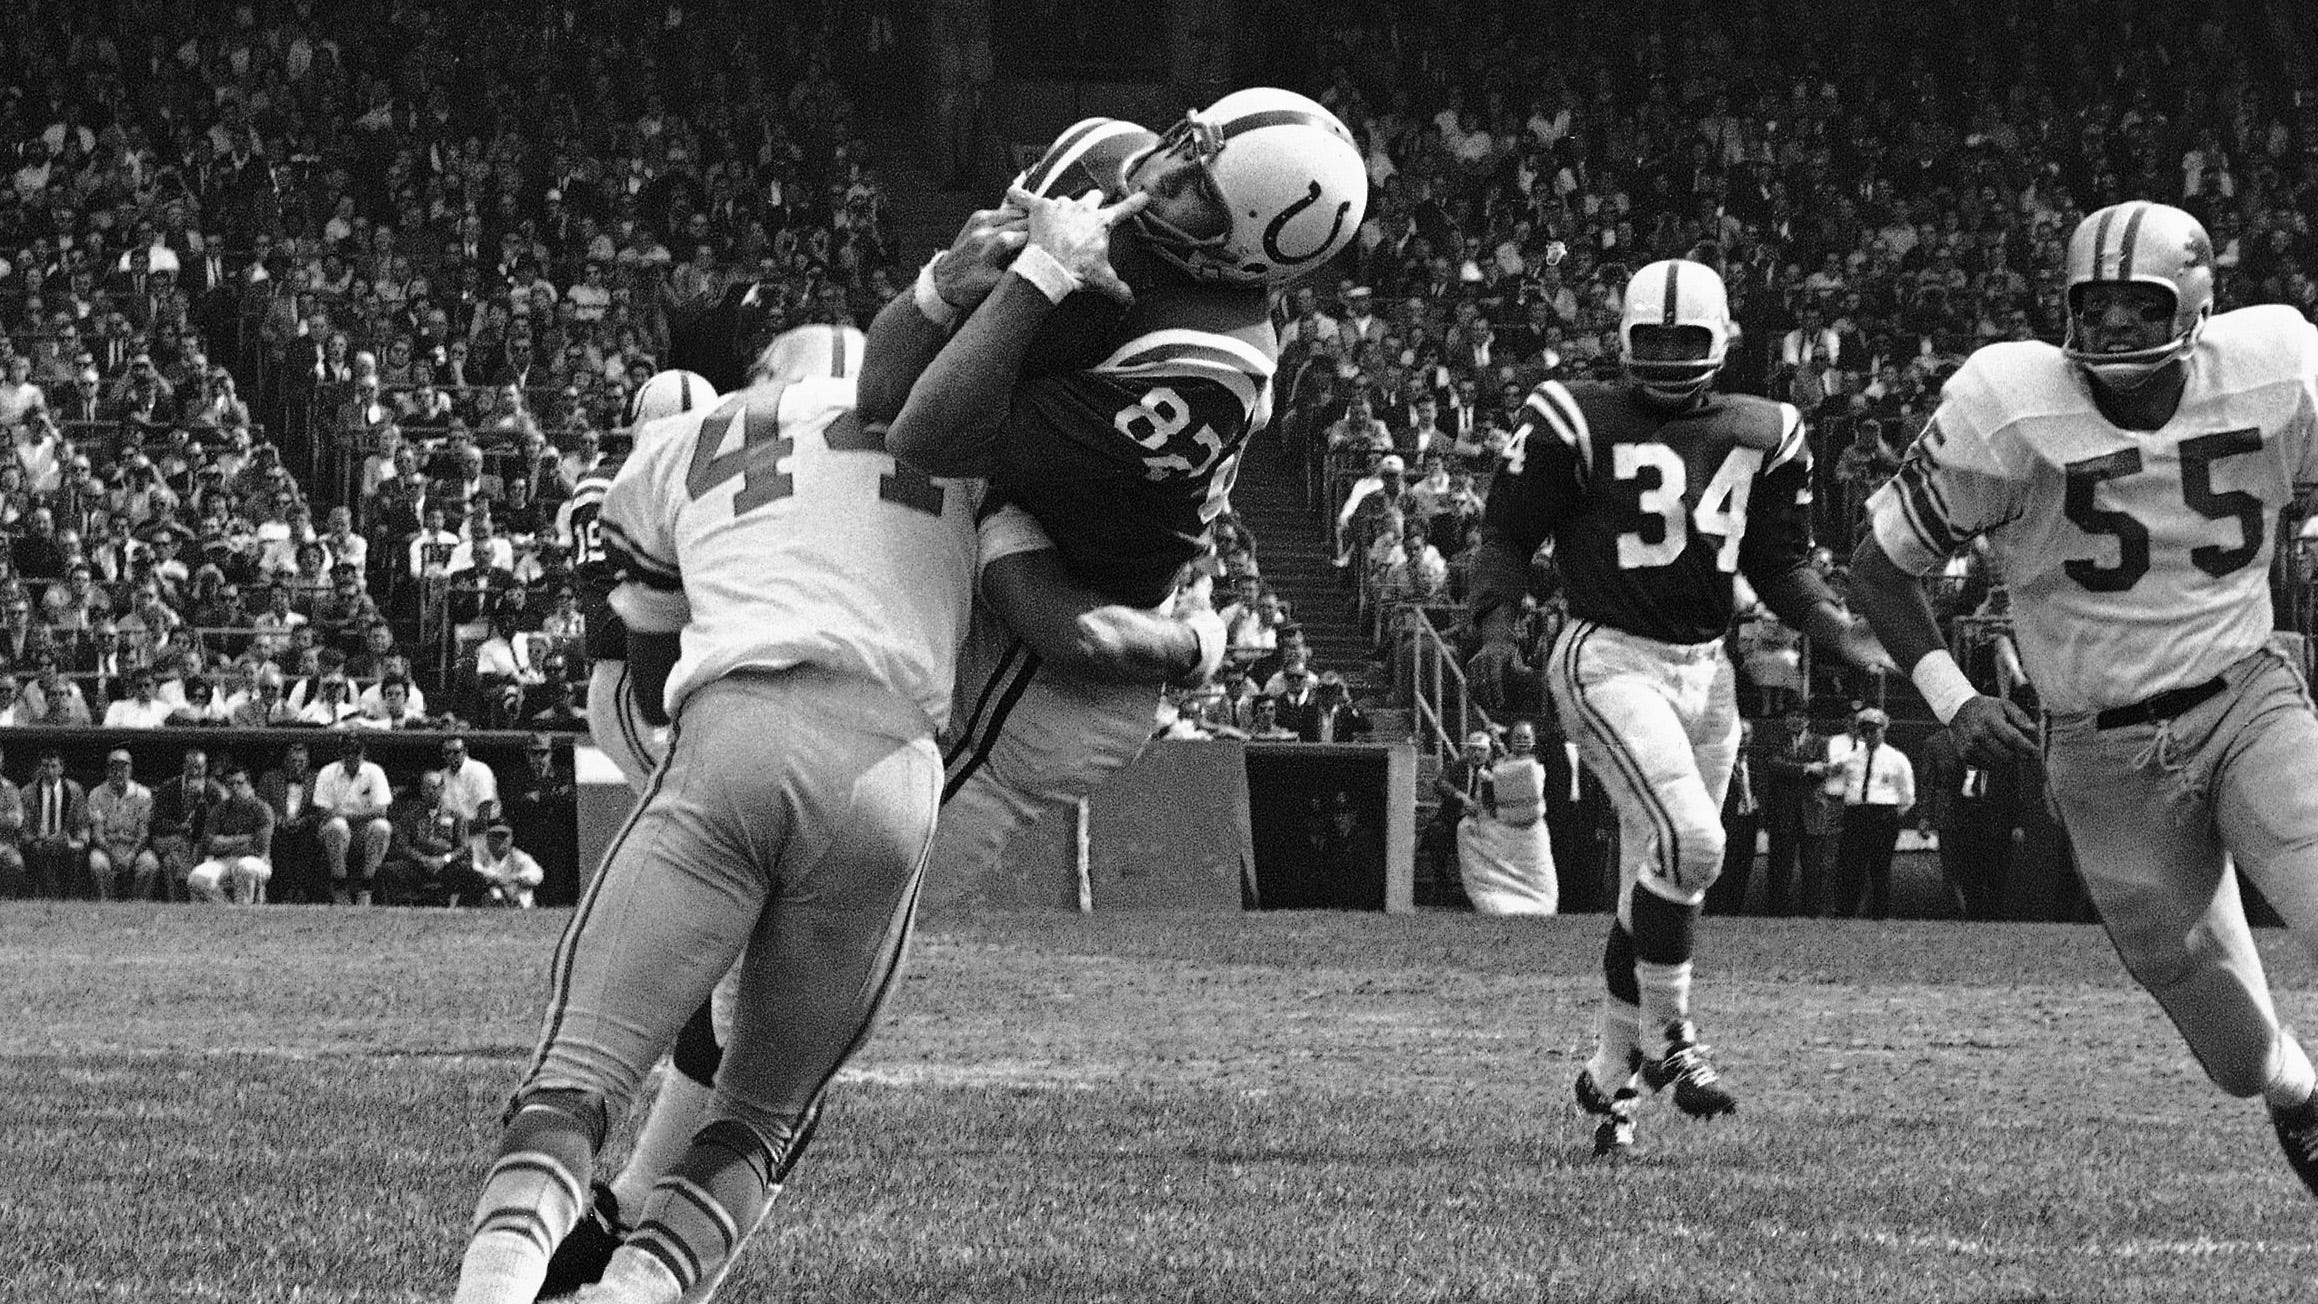 Football from 1958 NFL Championship game up for auction